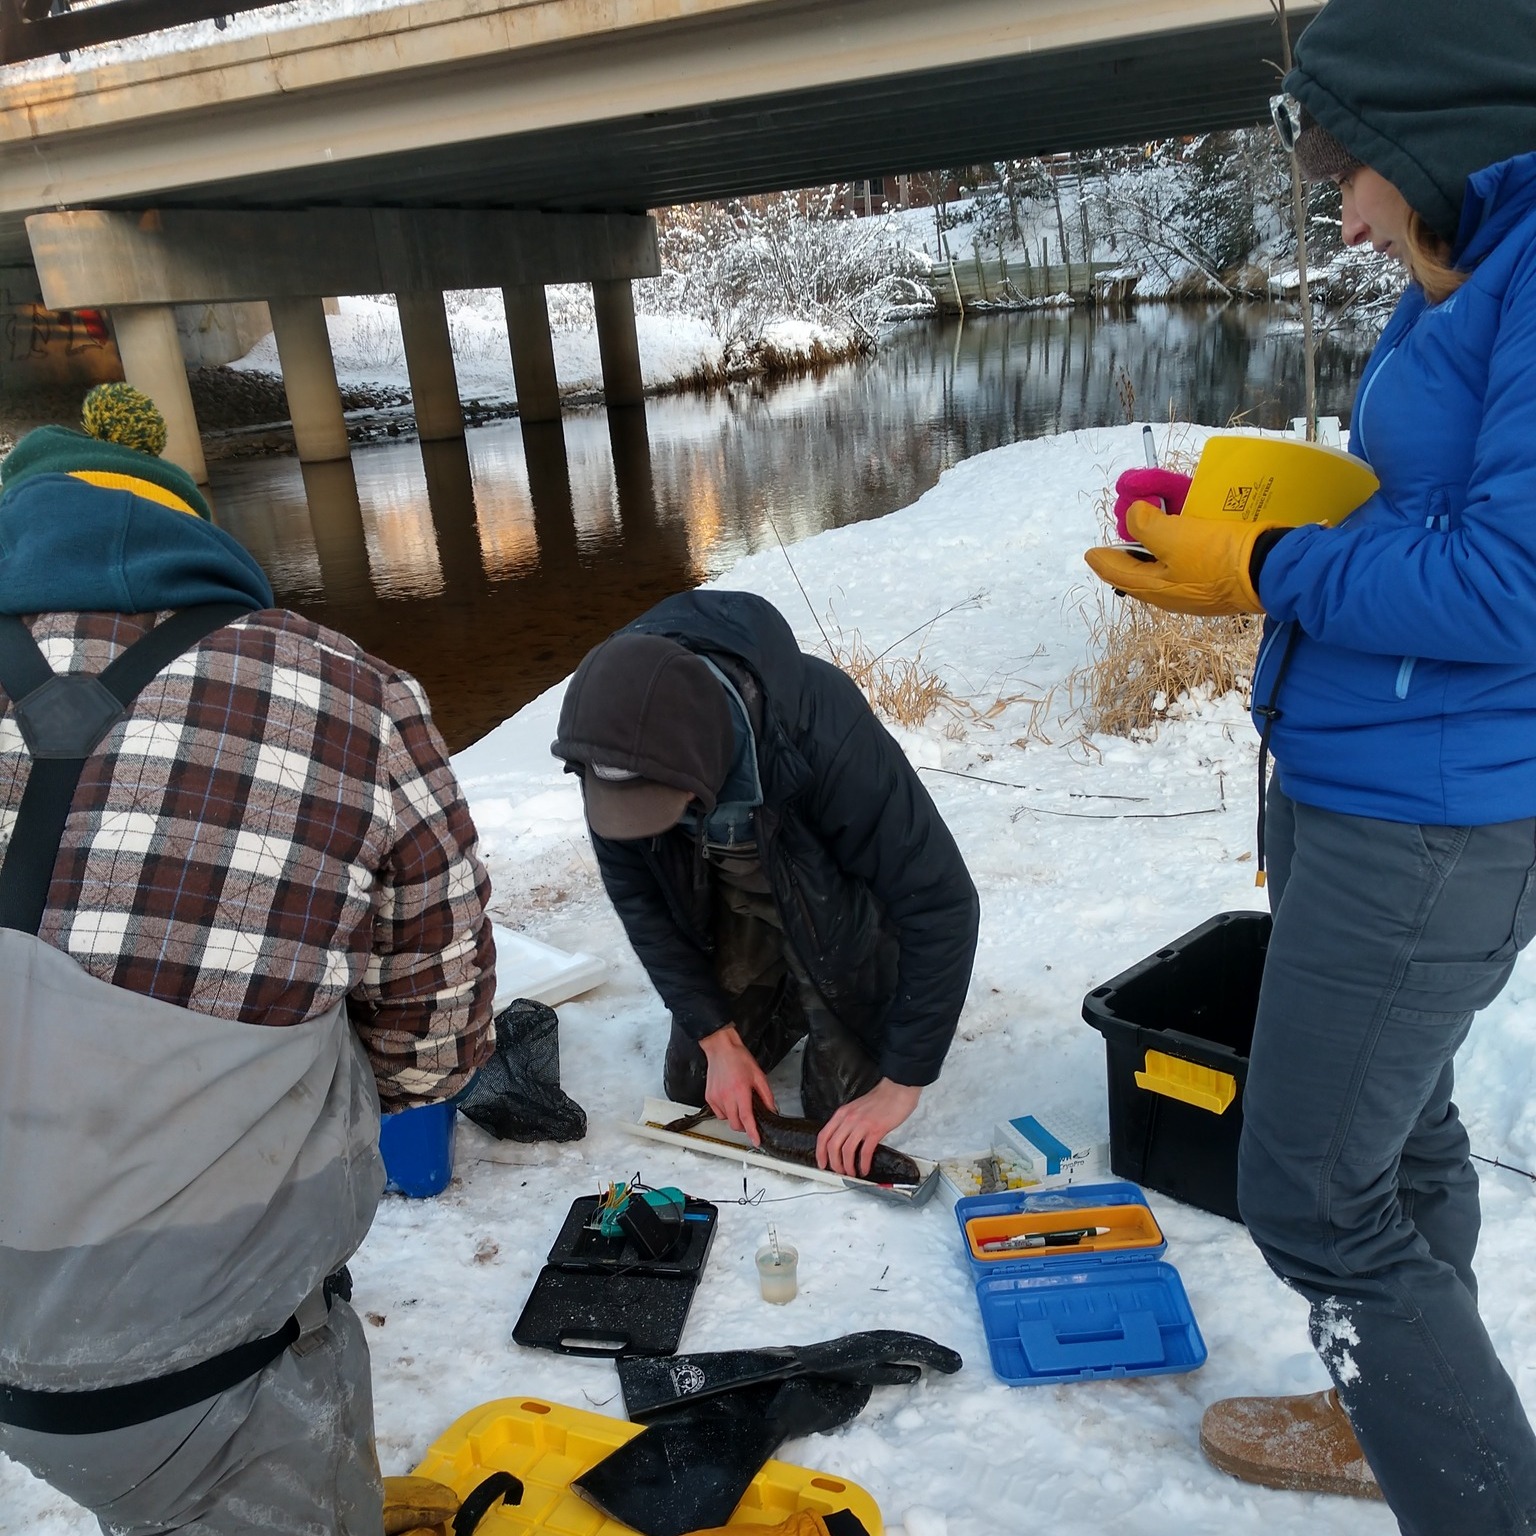 Members of Leonard's fish lab out in the field studying burbot